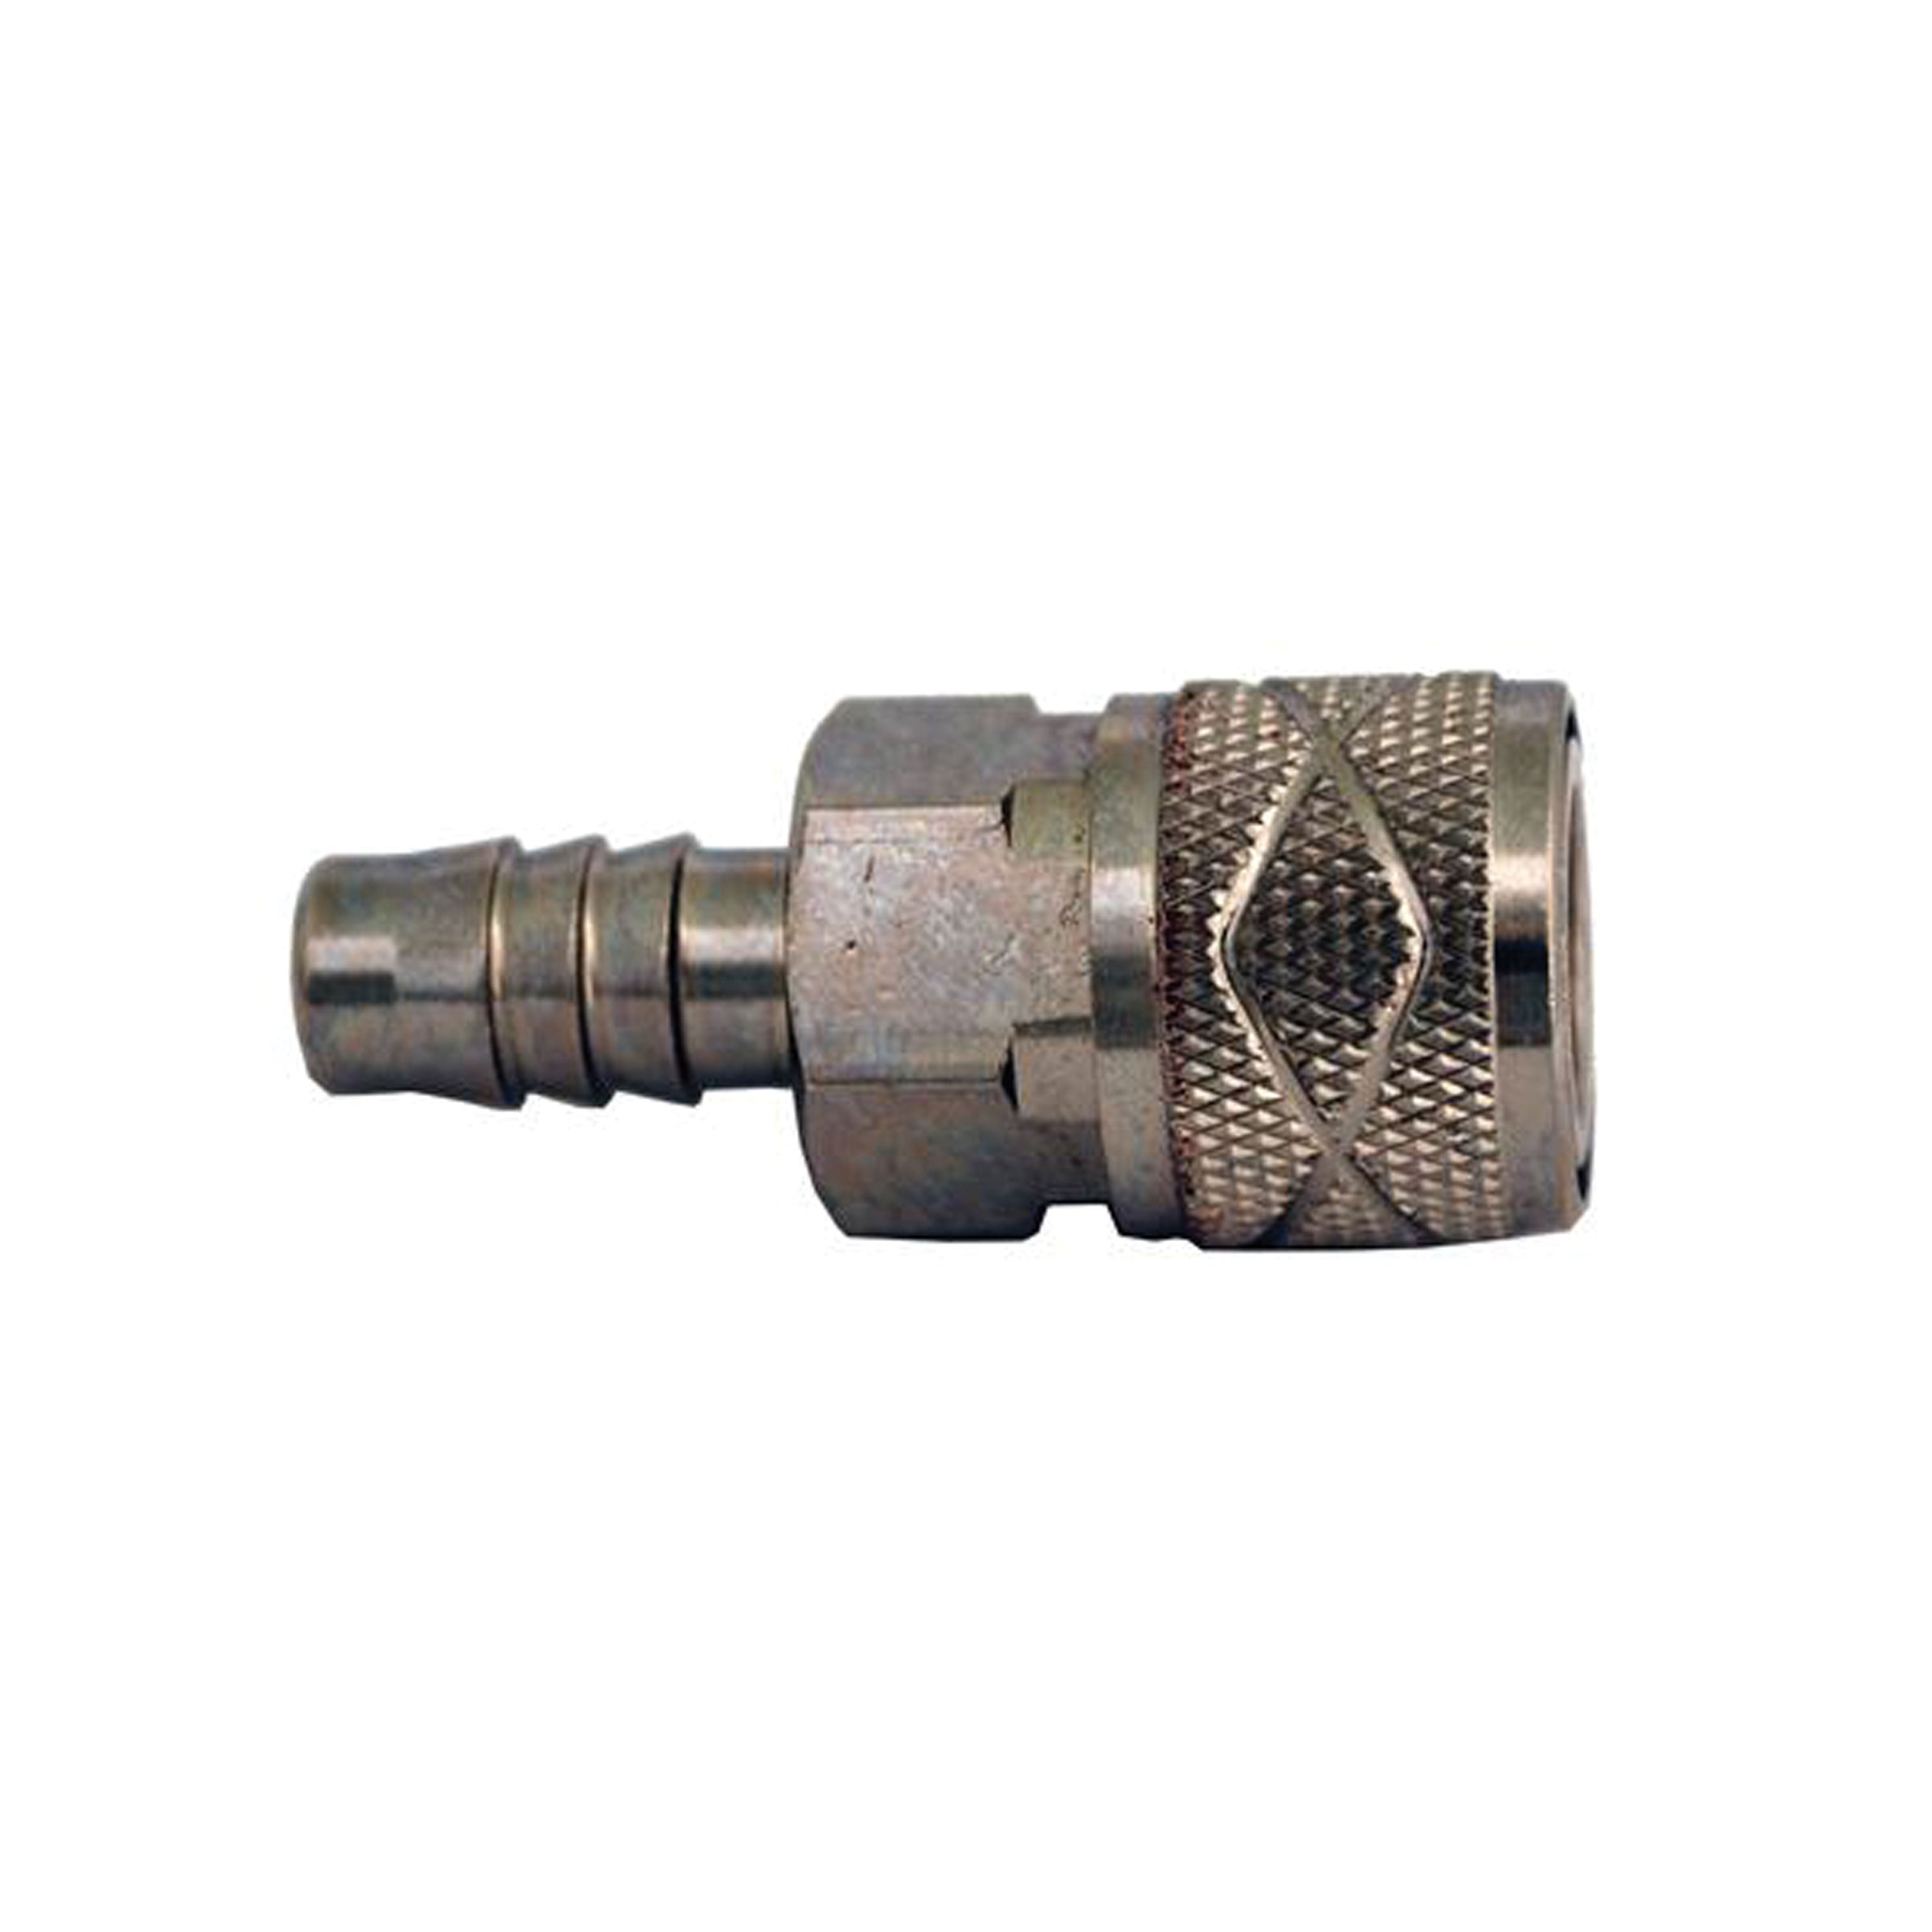 Attwood 88FTS014-6 Suzuki Fuel Hose Fitting - Under 75 HP, Female 3/8 in. Barb, Chrome-Plated Brass